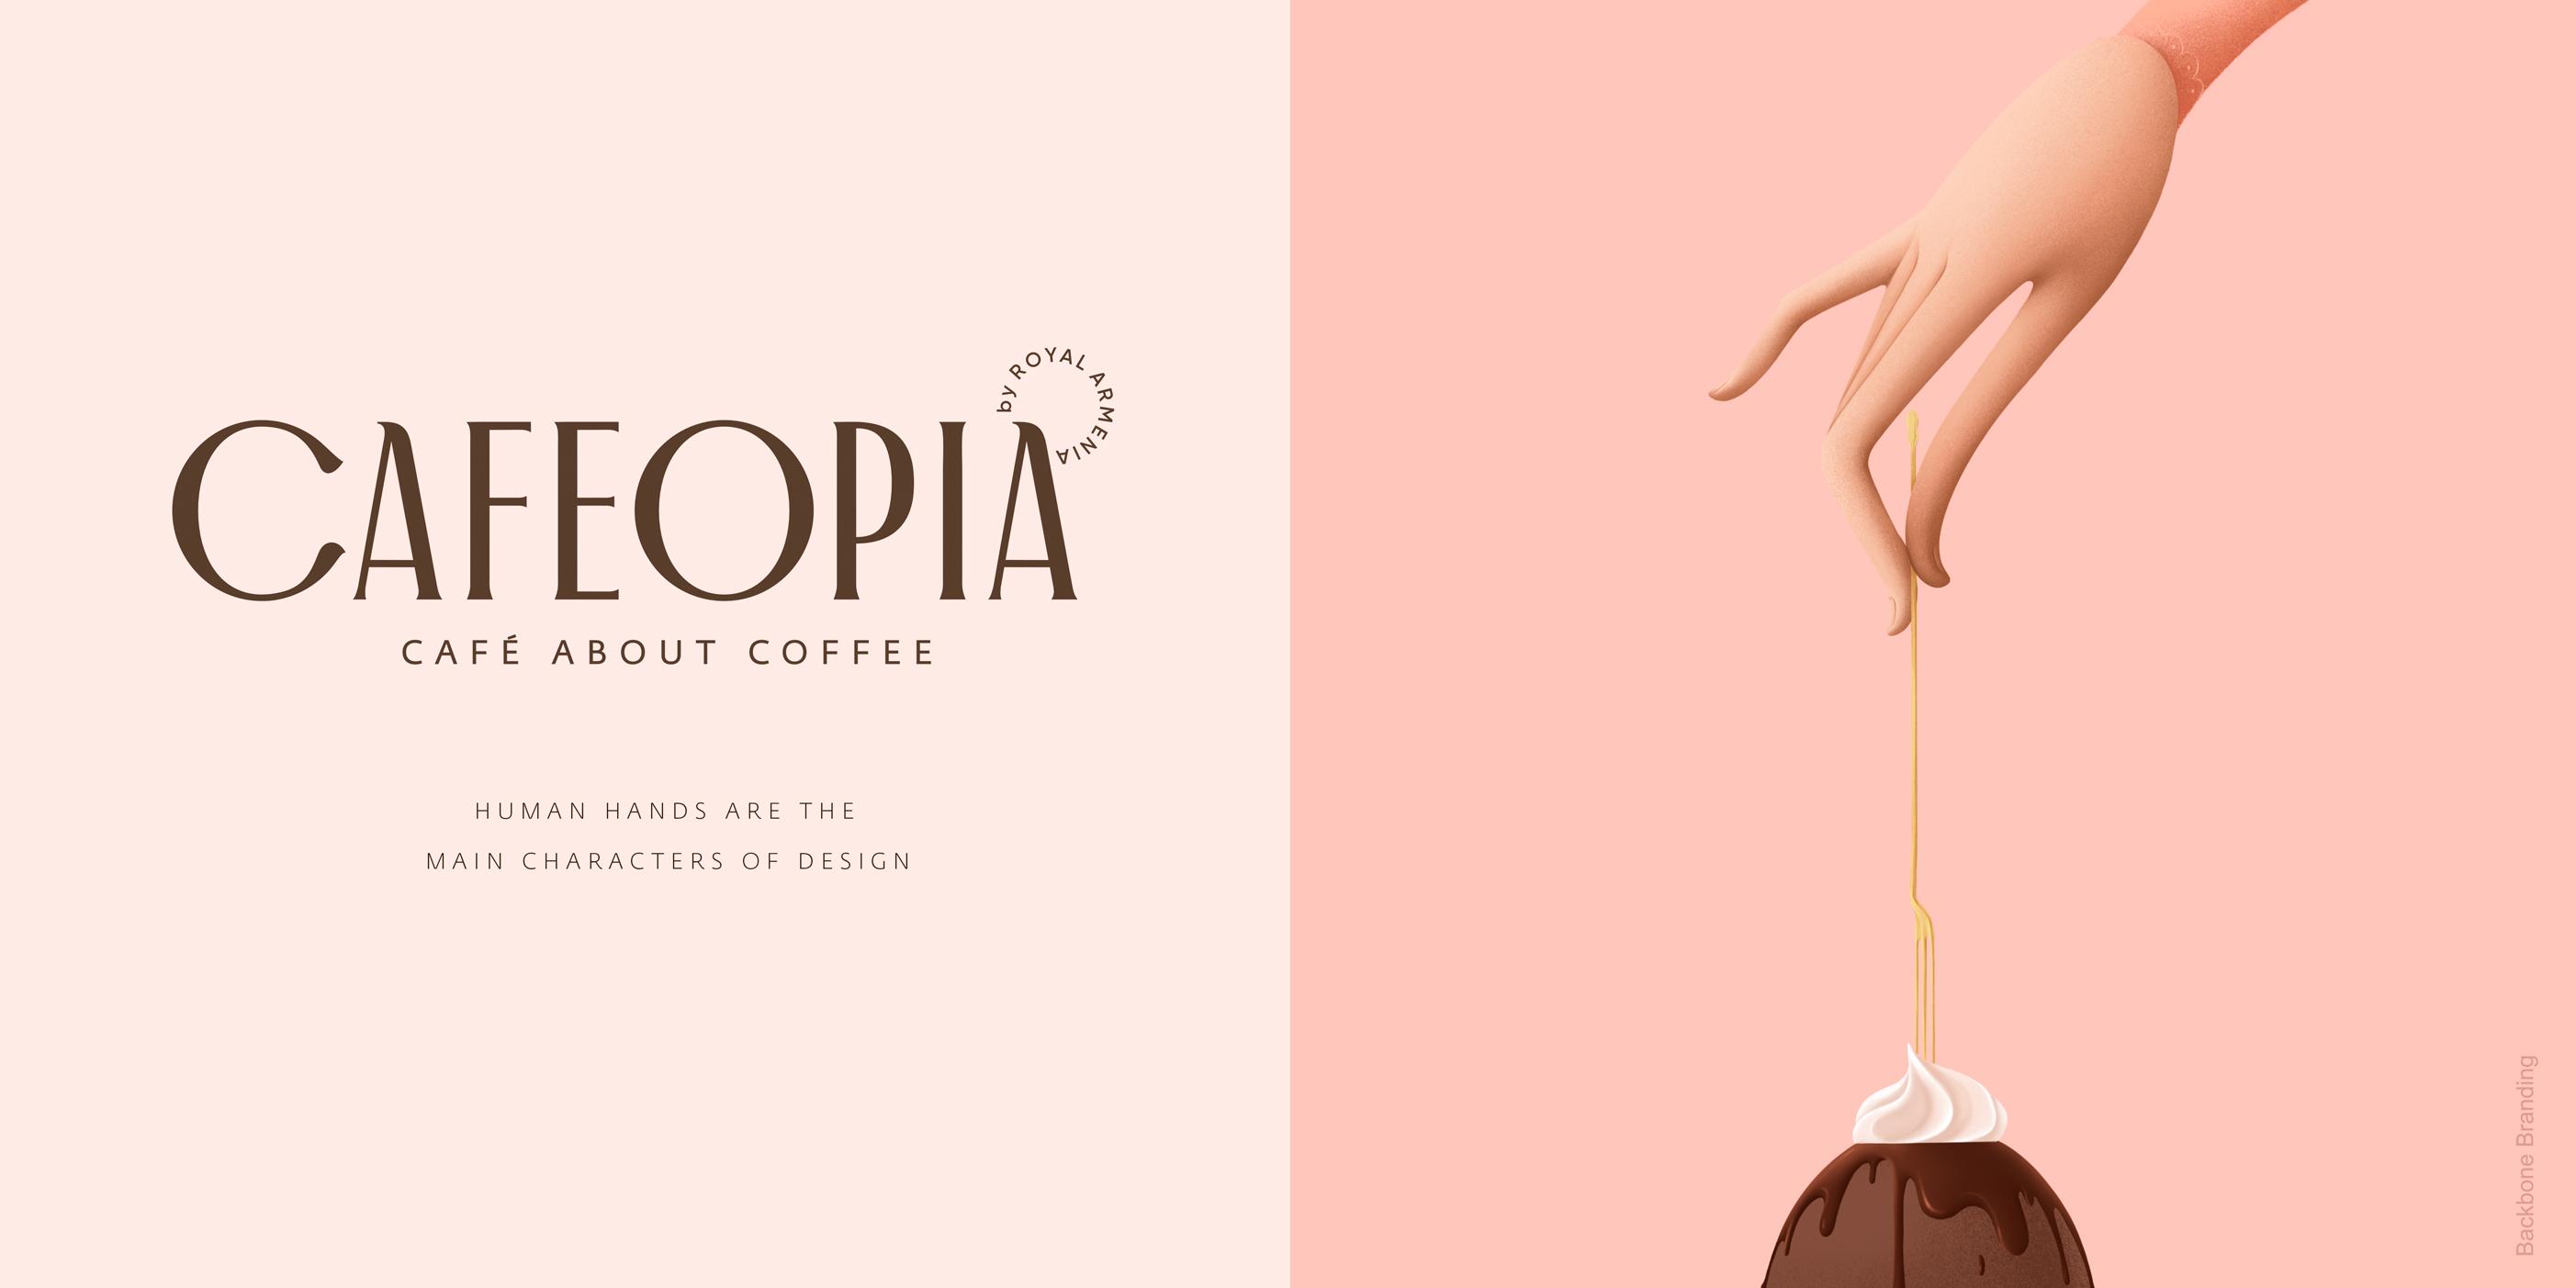 cafeopia_02